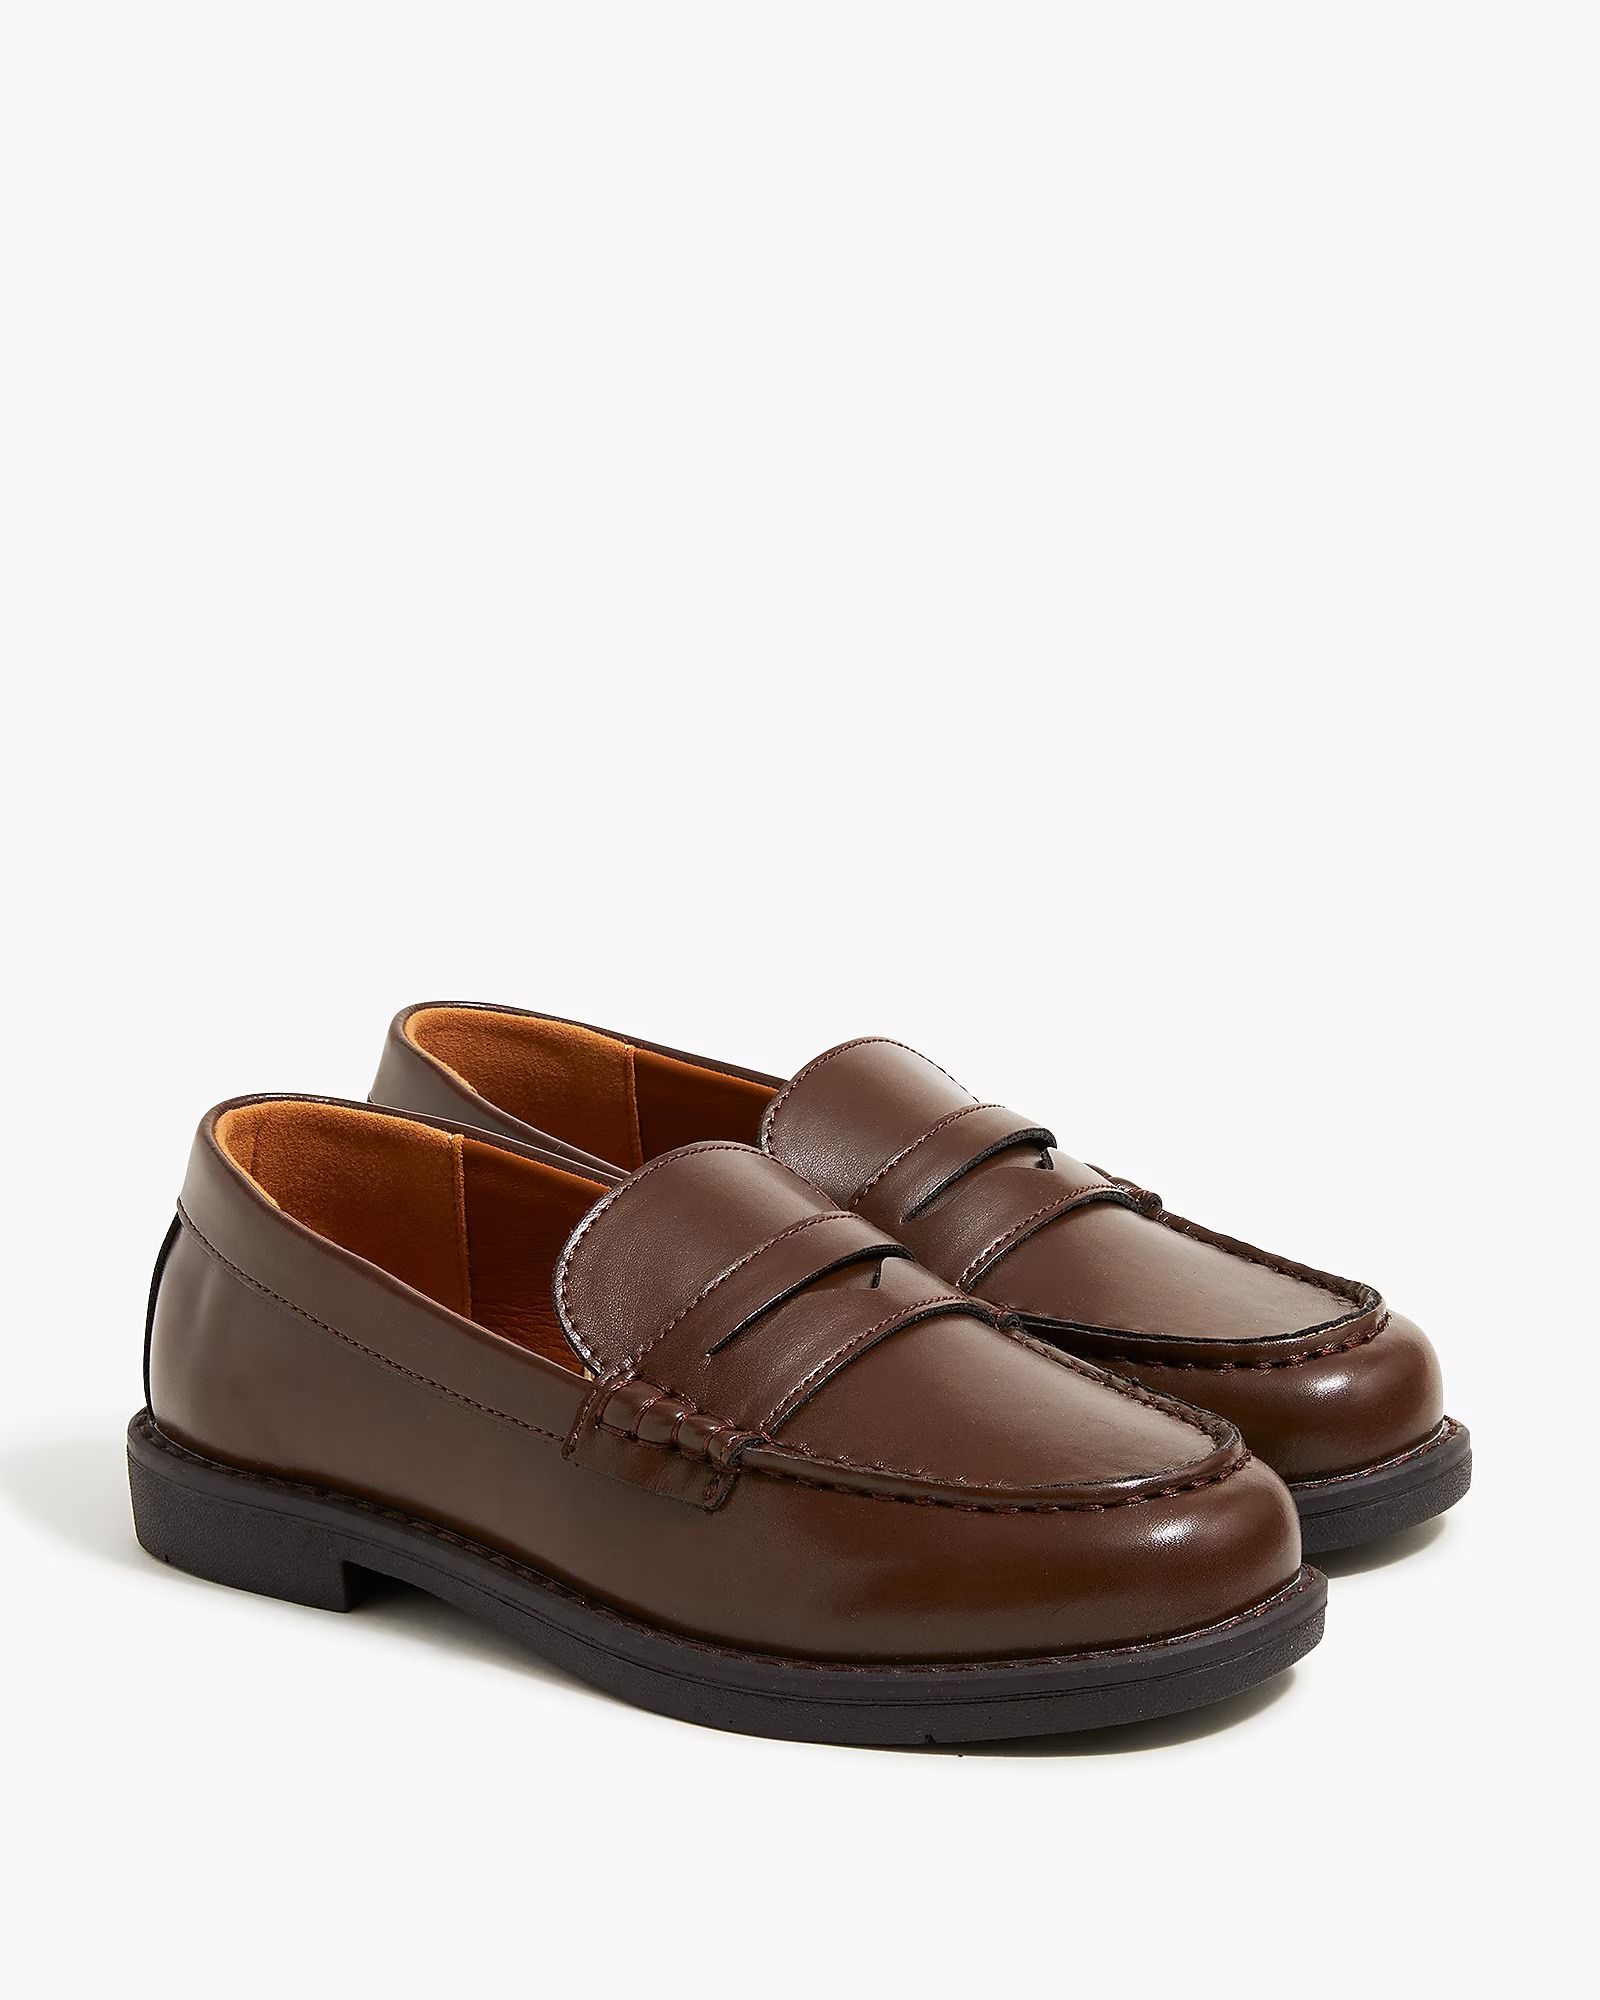 Boys' penny loafers | J.Crew Factory